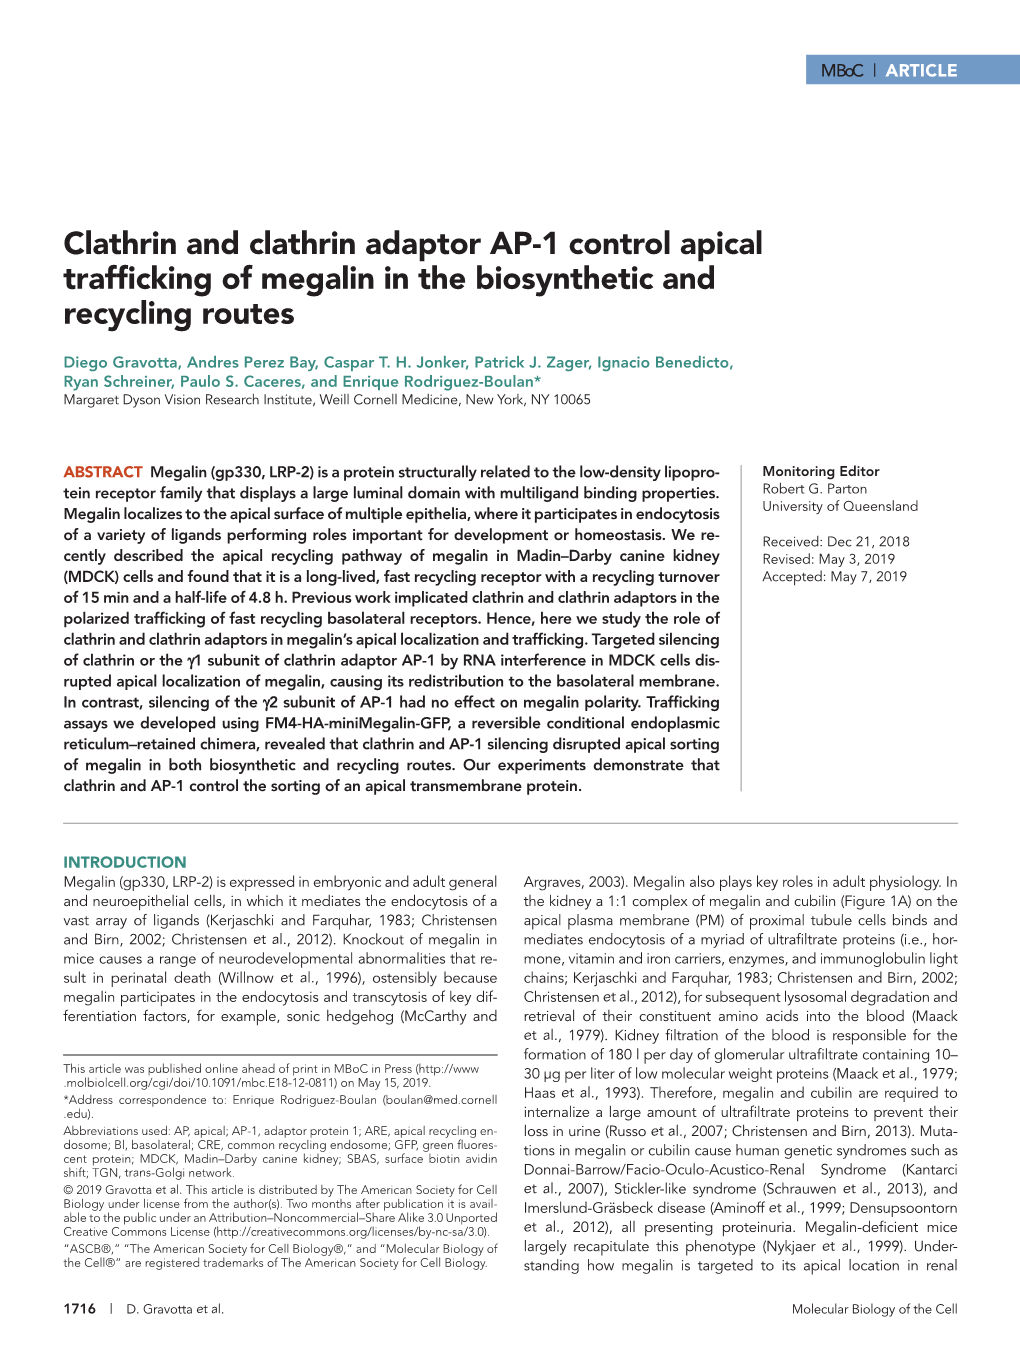 Clathrin and Clathrin Adaptor AP-1 Control Apical Trafficking of Megalin in the Biosynthetic and Recycling Routes